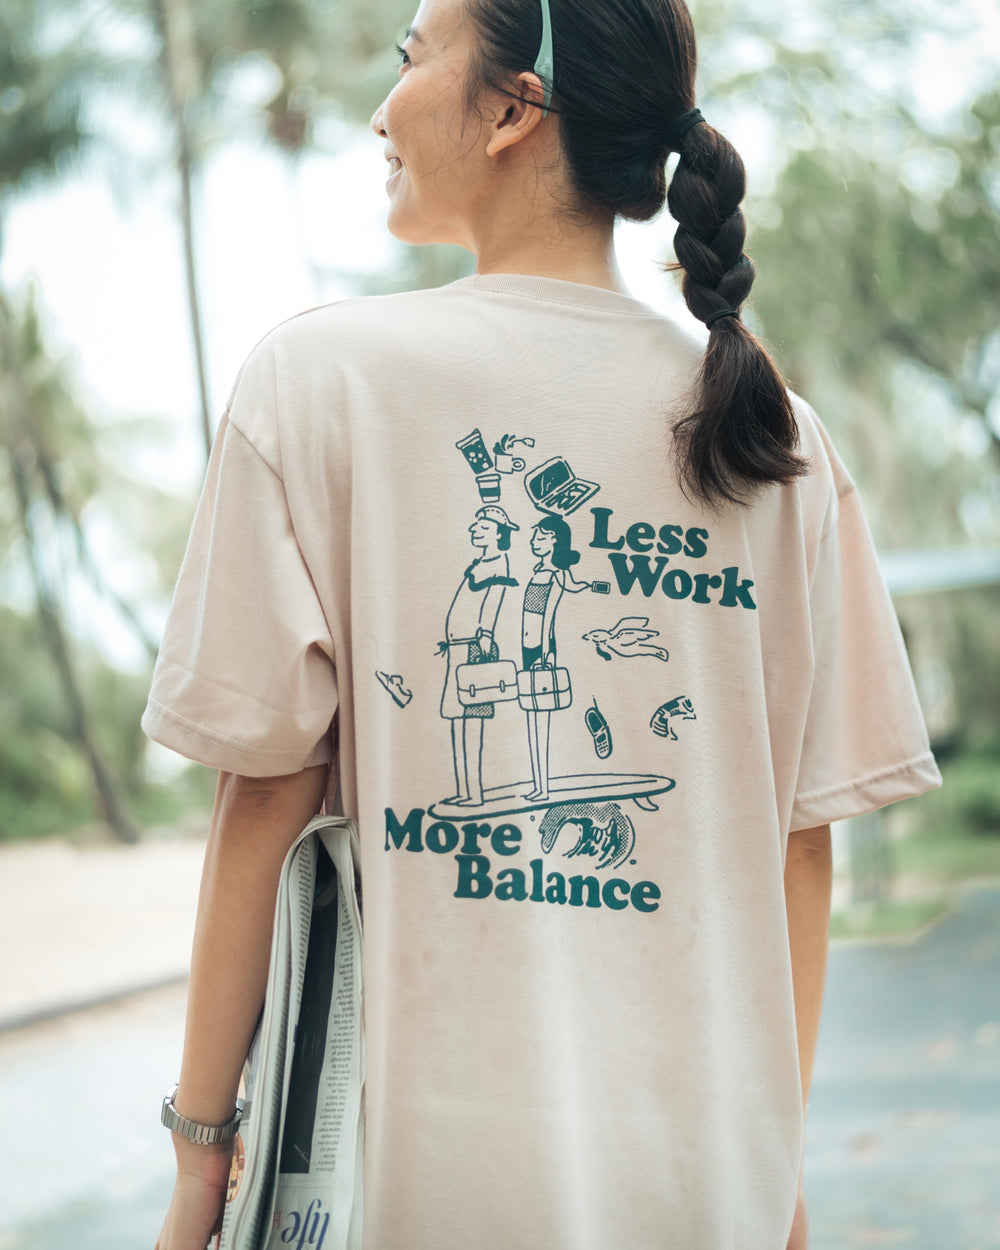 lady wearing a graphic t shirt saying work life balance on the back holding newspaper